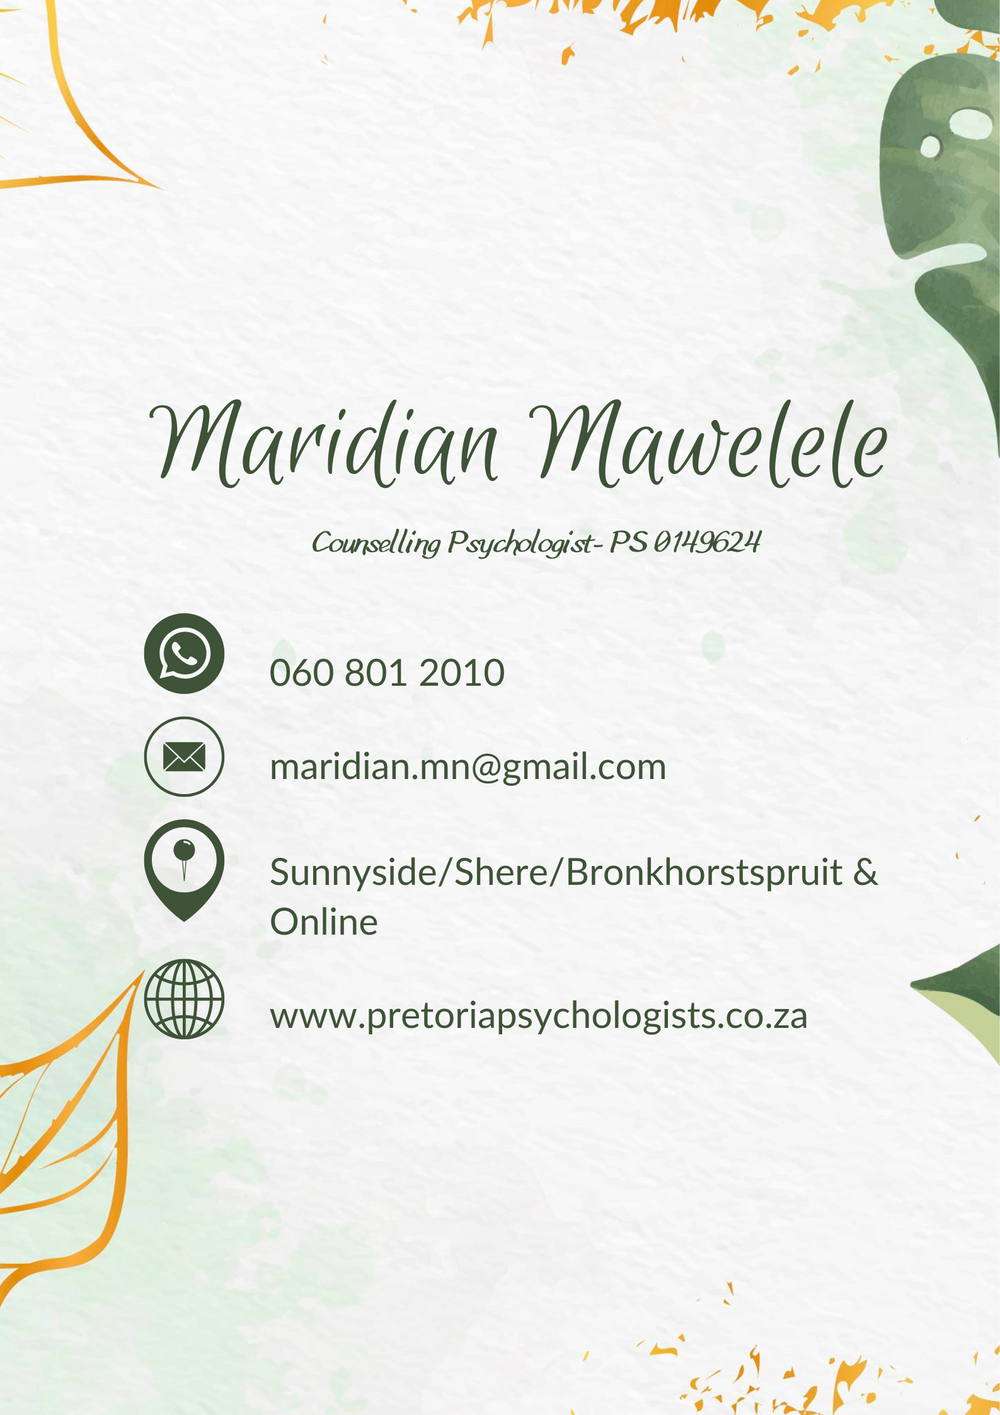 I offer counselling services in 3 locations, Sunnyside, Lombardy and in Bronkhorstspruit. I am also available for online consultations. Reach Out!